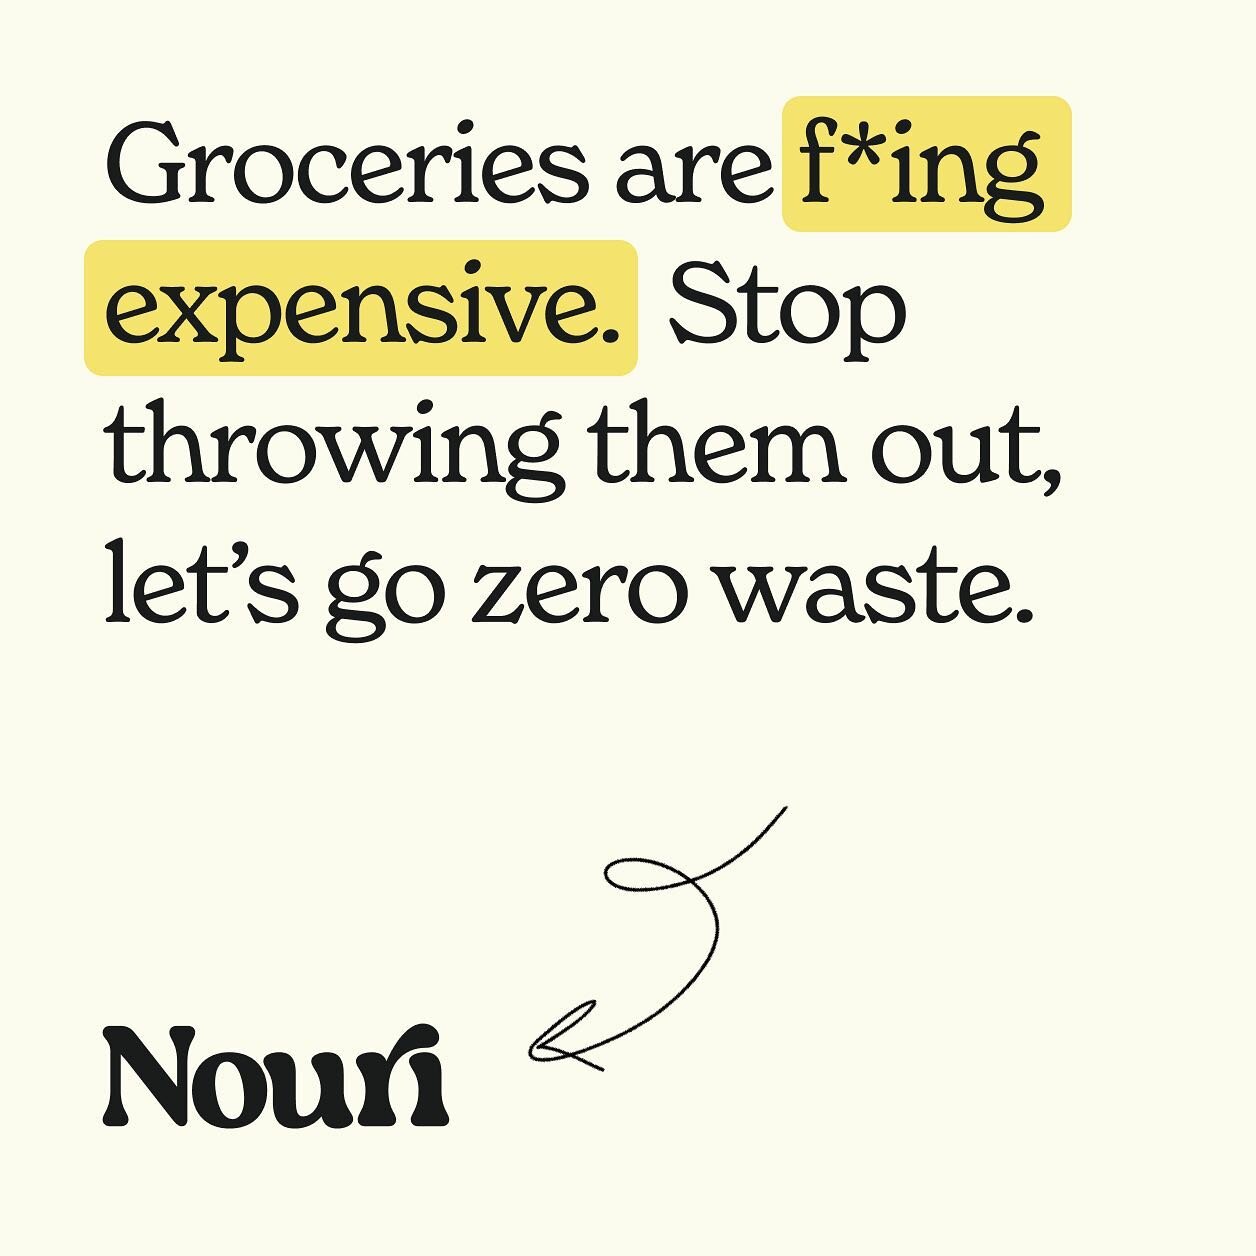 Hate throwing out food every week? Nouri can help, we maximize your ingredients each week for the benefit of the environment and your wallet. 🌱💸

Think... 
🍅 Using the same ingredient across recipes 
🧁 No more impulse purchases 
🥬 No more over-e